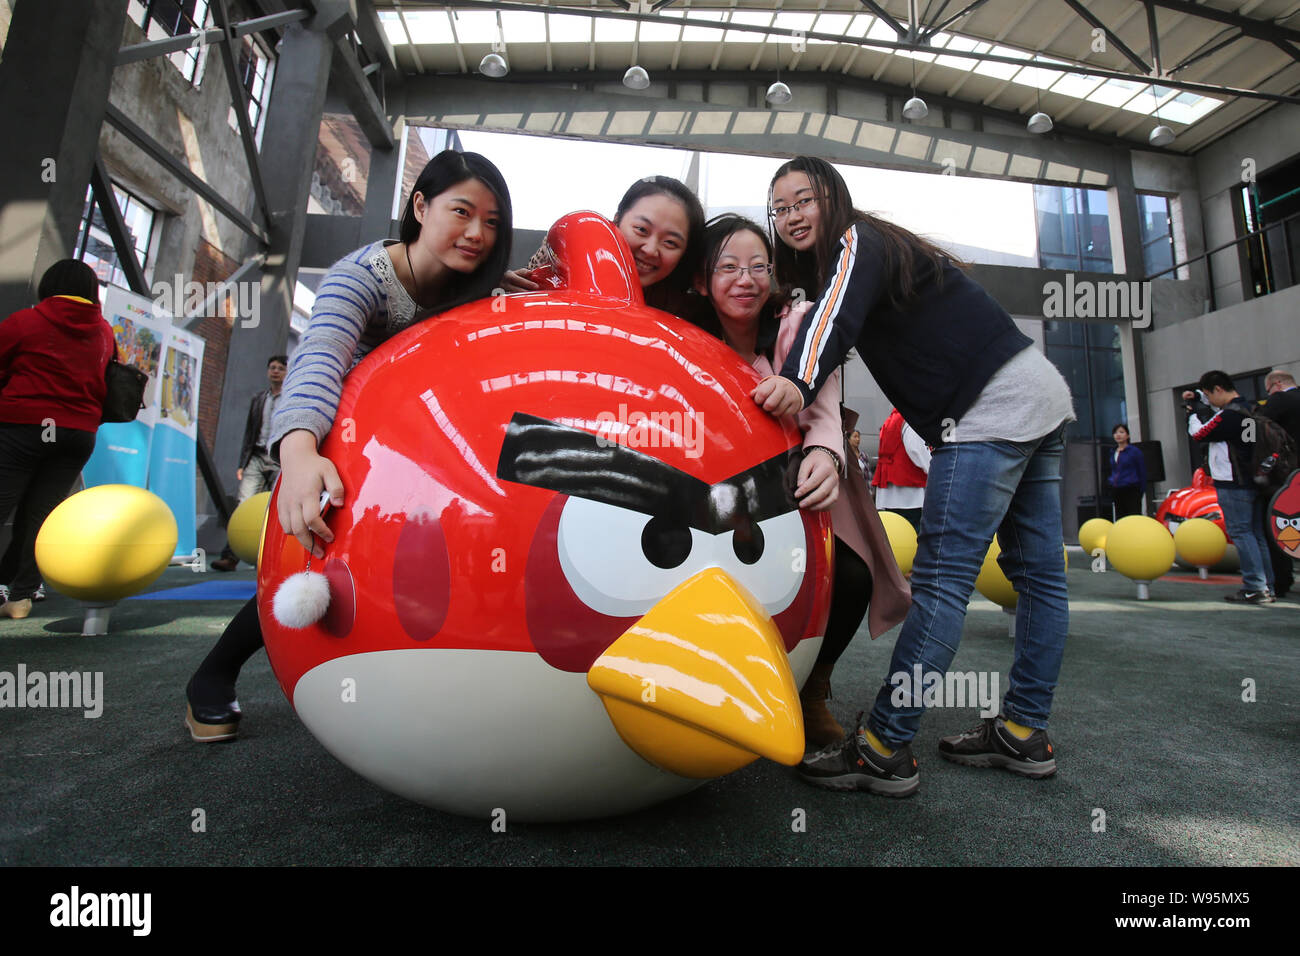 Young Women Pose With An Angry Bird At The Angry Birds Theme Park In Shanghai Tongji University In Shanghai China 31 October 12 Chinas First An Stock Photo Alamy